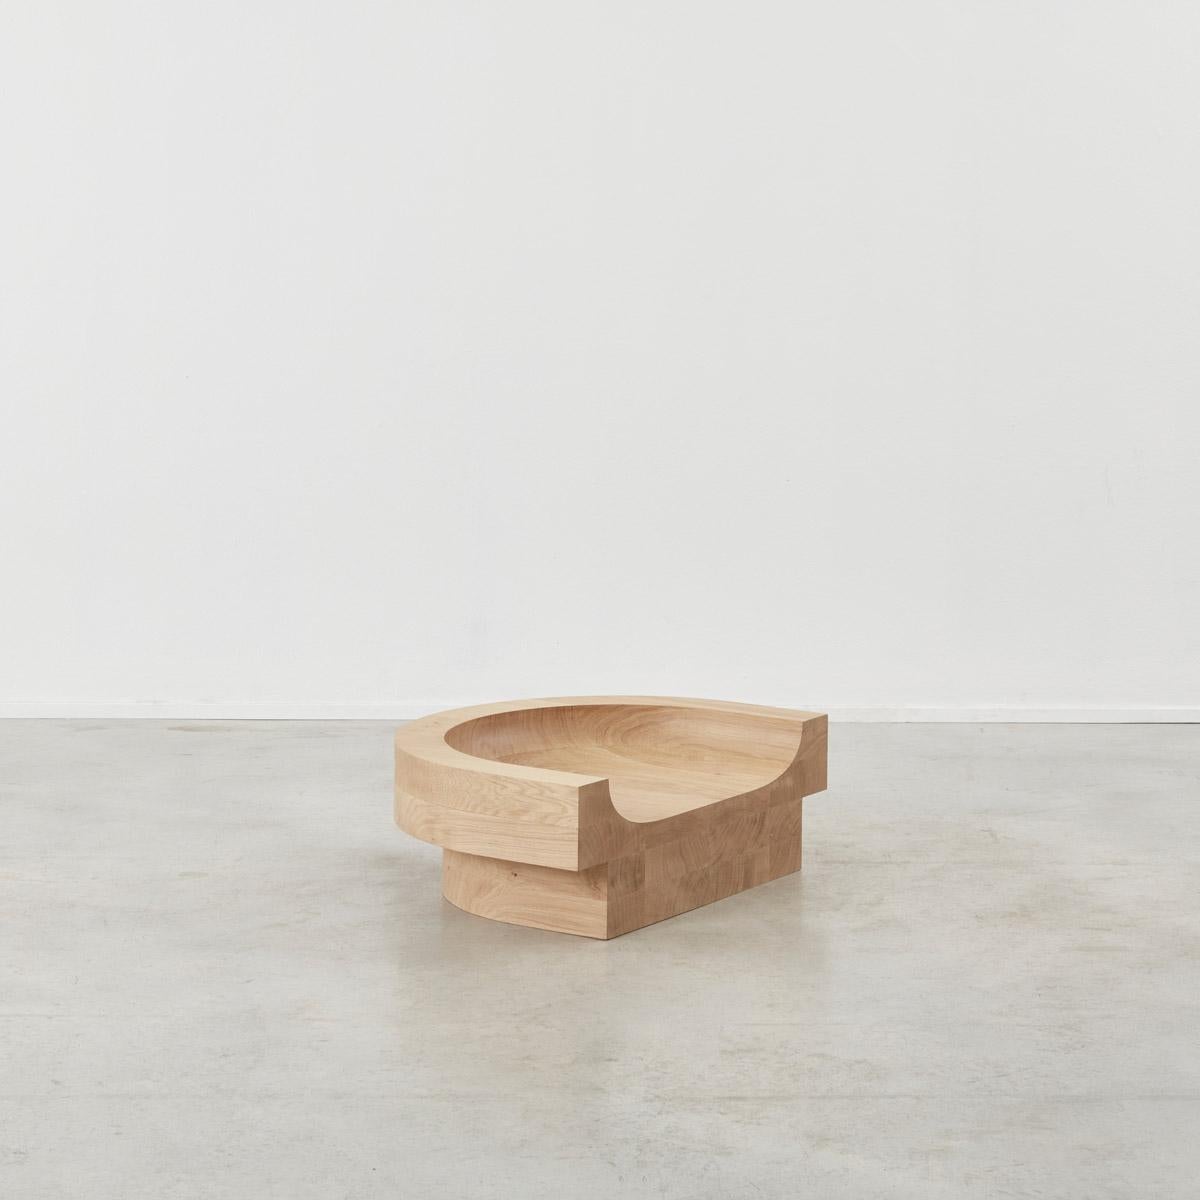 ‘Low Seat’ is a new work by architect, designer and maker Benni Allan exploring different ways of sitting. Part of his first full collection of furniture, Low Collection, exclusive to Béton Brut. And was inspired by recent research trips to Japan,